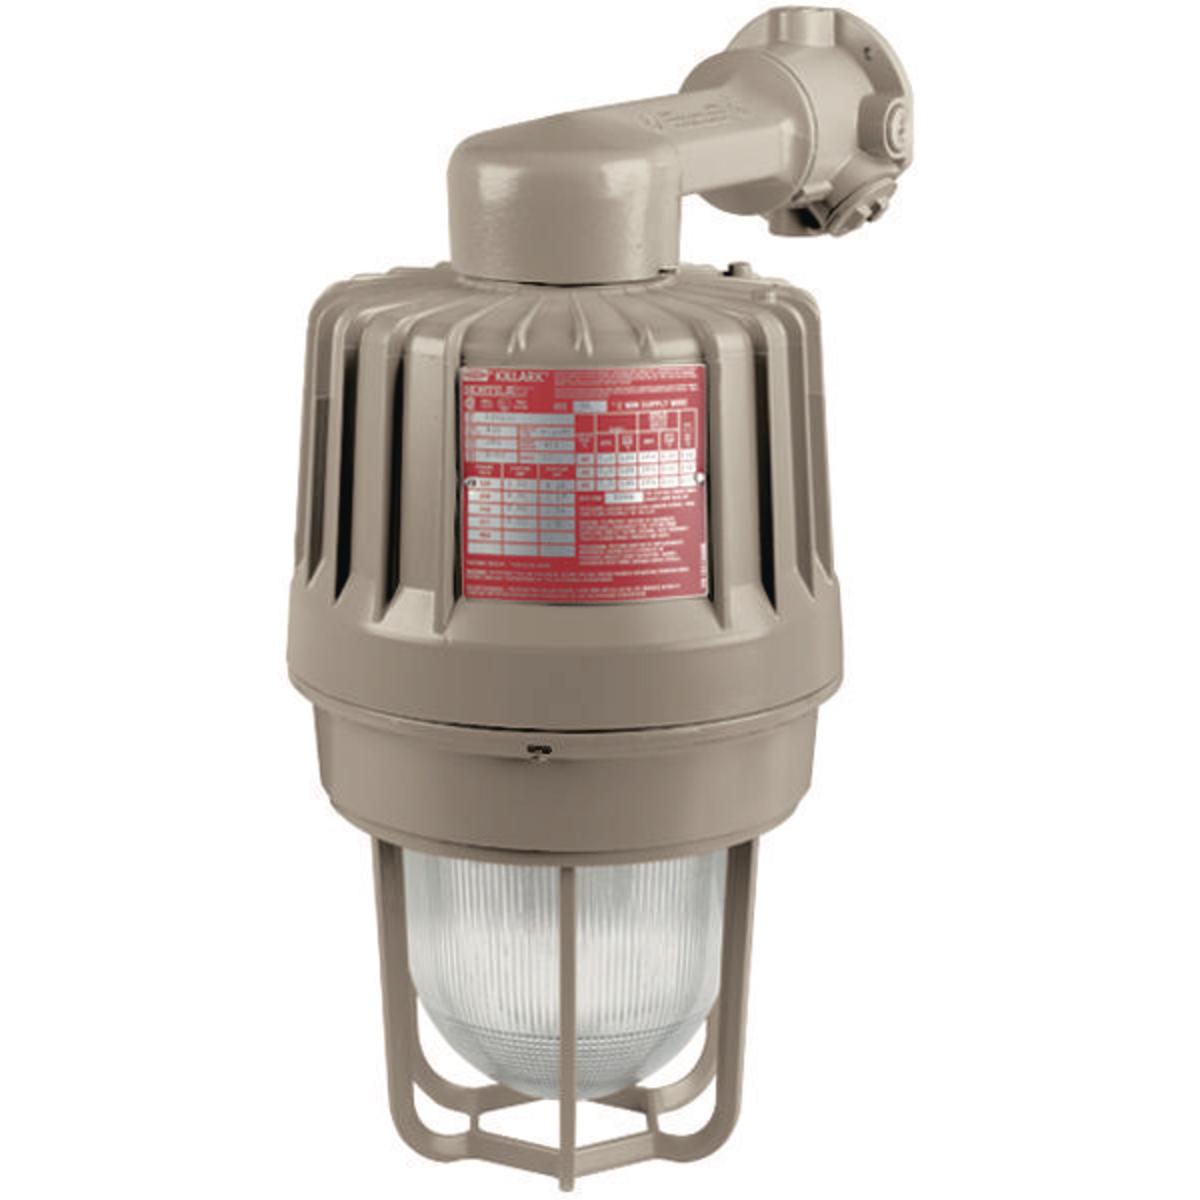 Hubbell EZS400B3 HID 400W Quadri-Volt High Pressure Sodium 1" Wall Mount  ; Three light sources – High Pressure Sodium (50-400W), Metal Halide (70-400W) and Pulse Start Metal Halide (175-400W) ; Mounting choice –Pendant, ceiling, 25˚ stanchion or 90˚ wall mount, all with 